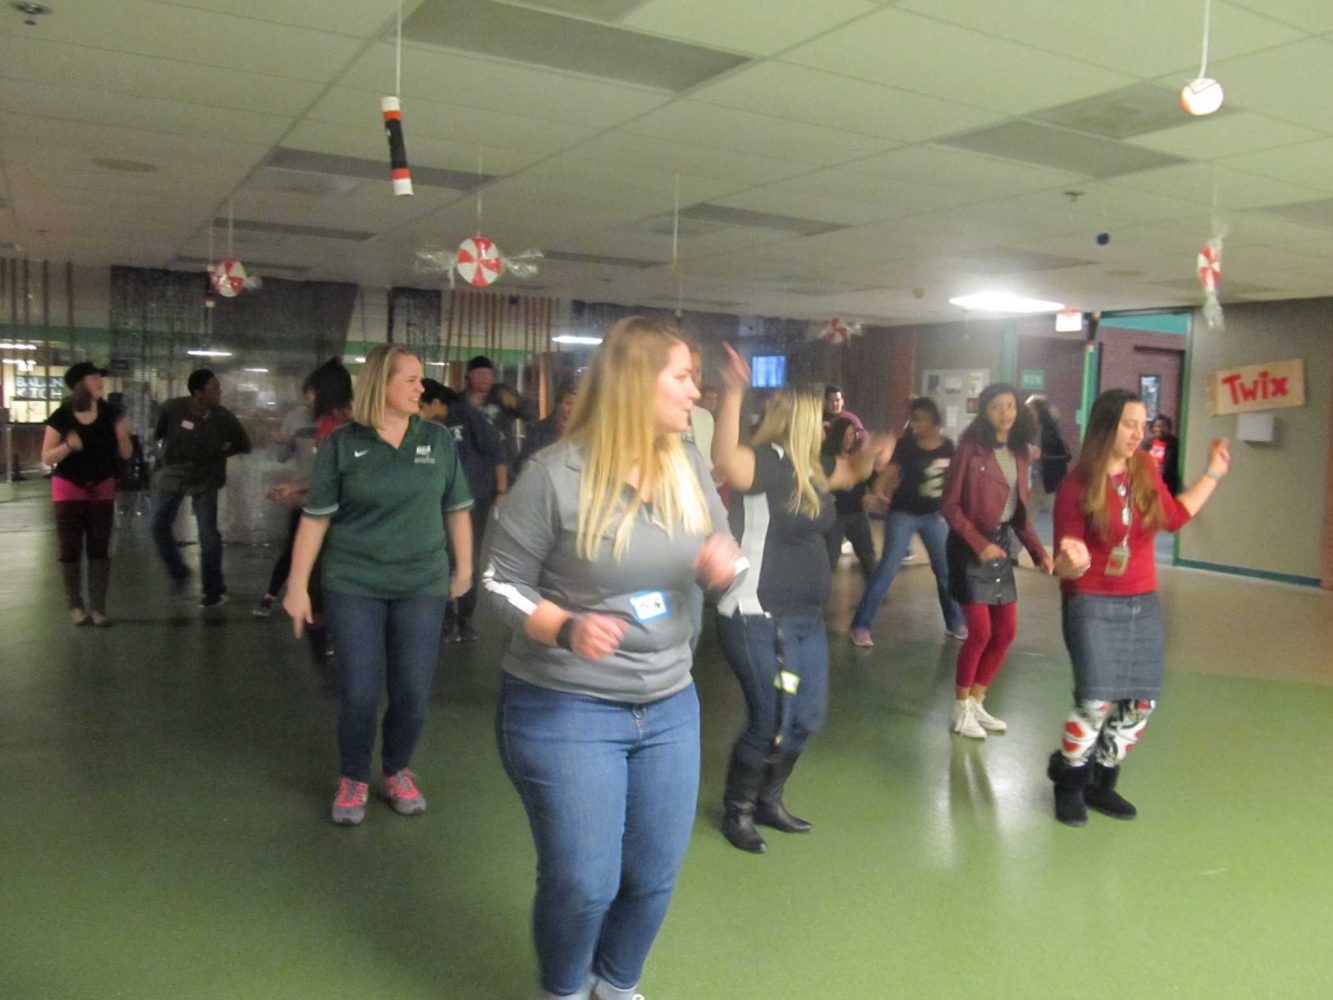 Students and teachers dance together in the cafeteria during the Night to Shine event.